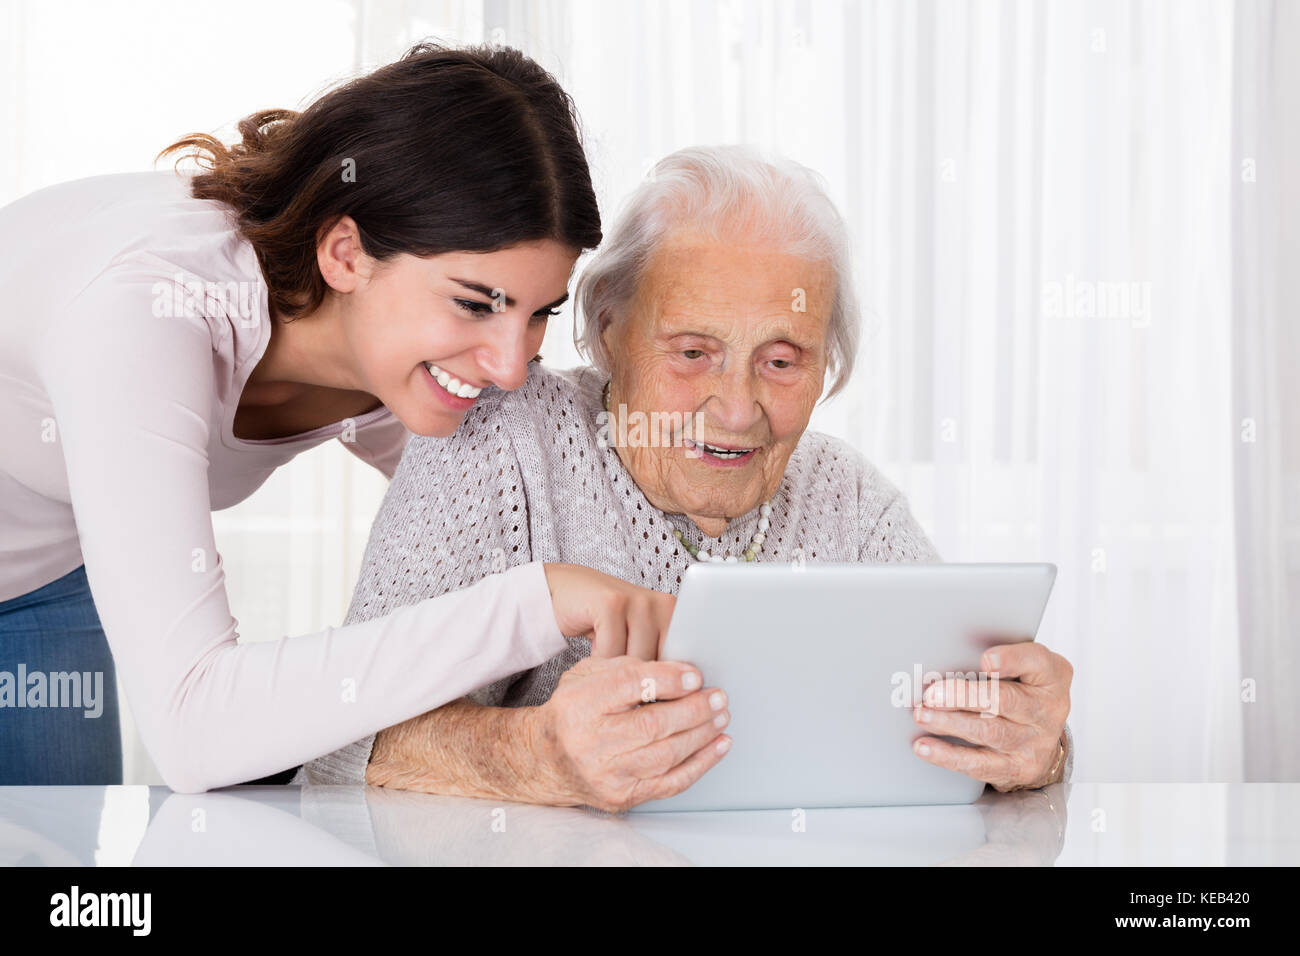 Young Woman Helping Her Grandmother For Using A Laptop On Desk At Home Stock Photo